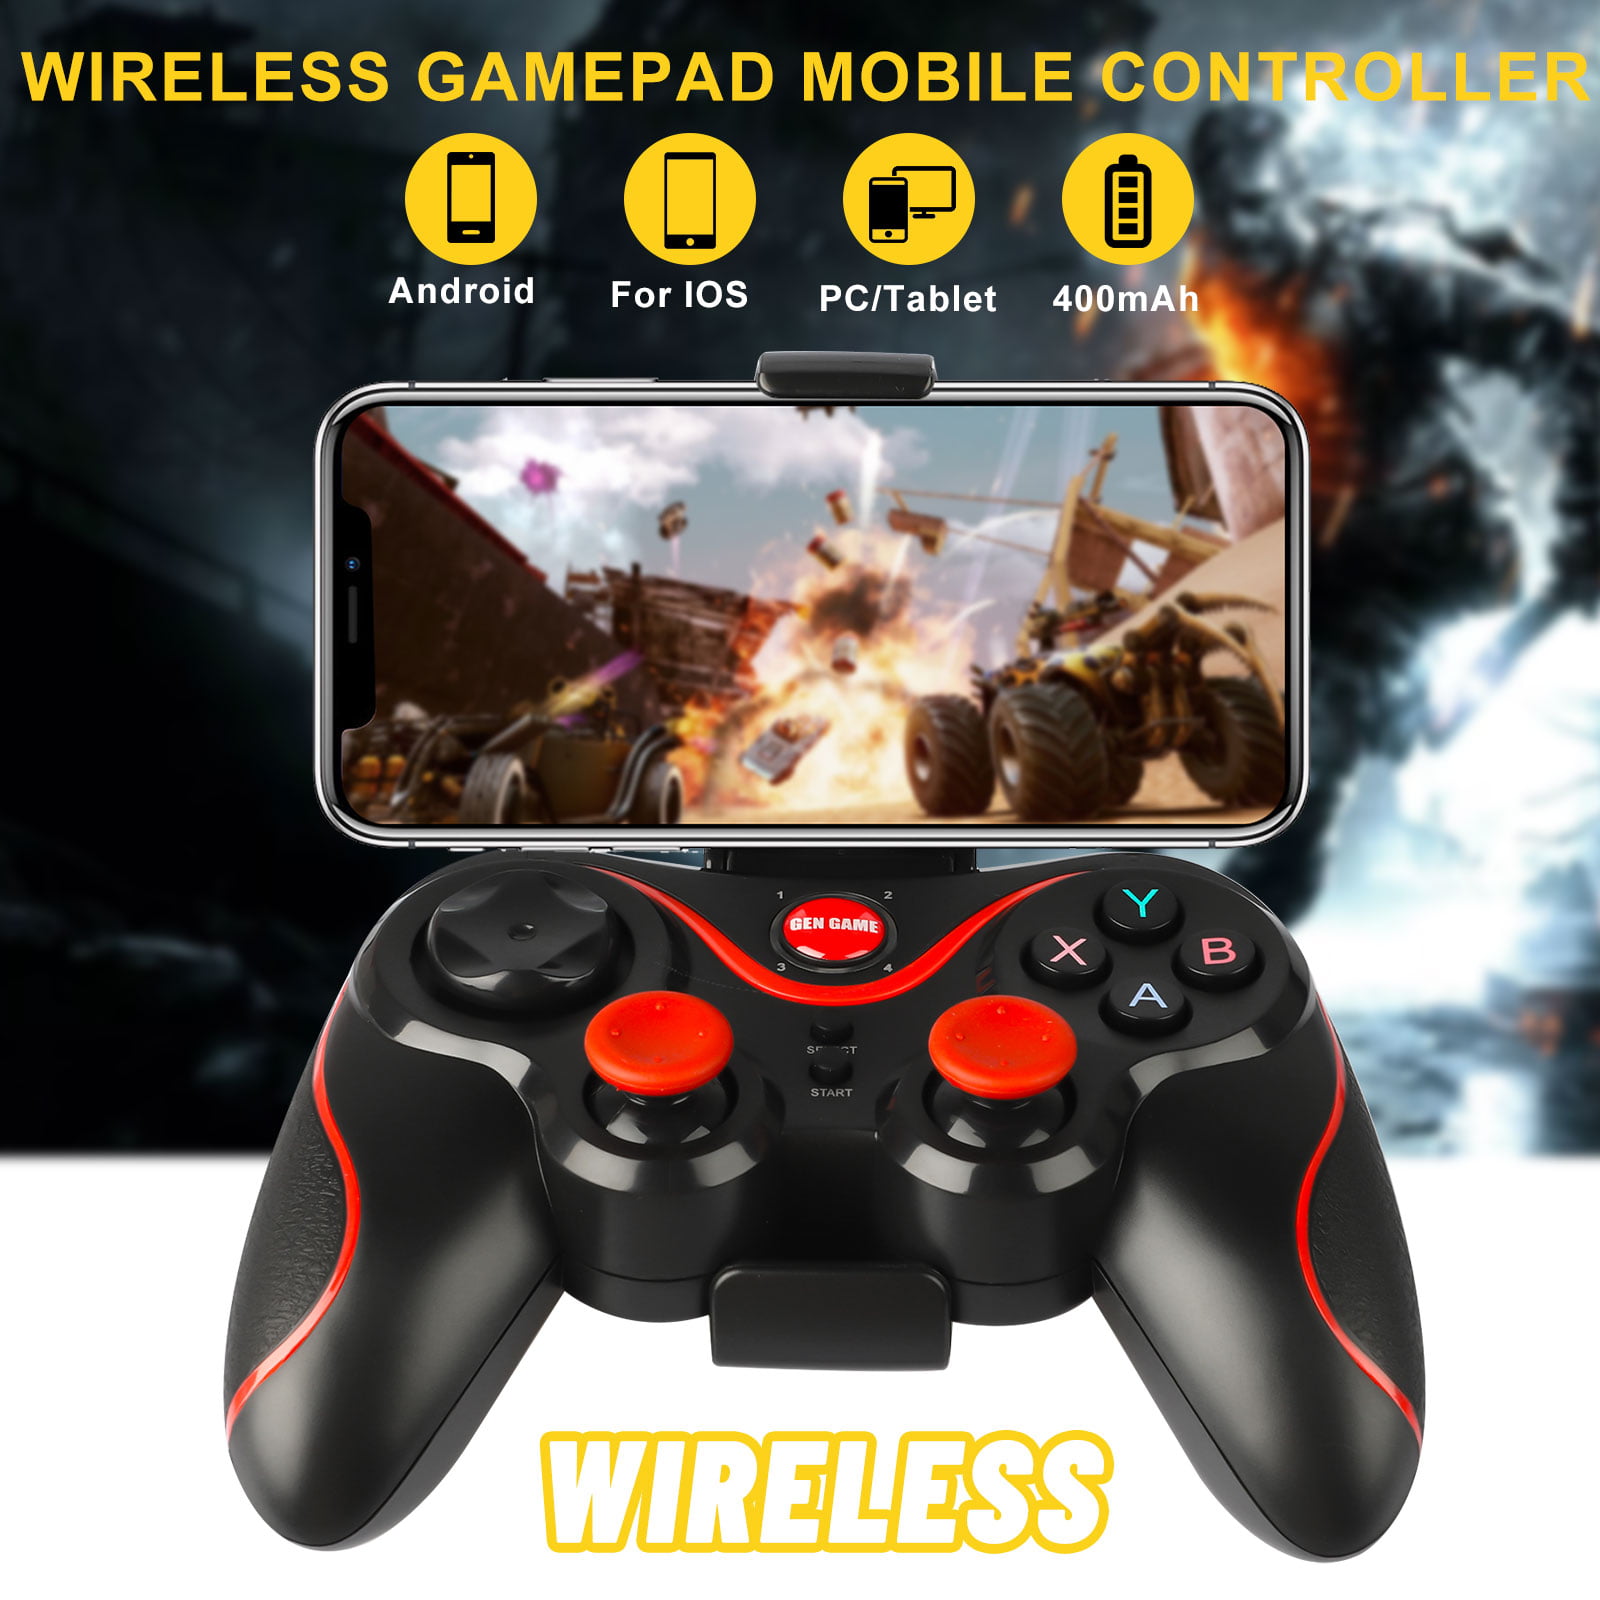 Eeekit Mobile Game Controller Wireless Gaming Gamepad Android Game Controller Bluetooth Gamepad Gaming Joystick Compatible With Iphone Ipad Android Phone Tablet Pc Perfect For The Most Games Walmart Com Walmart Com